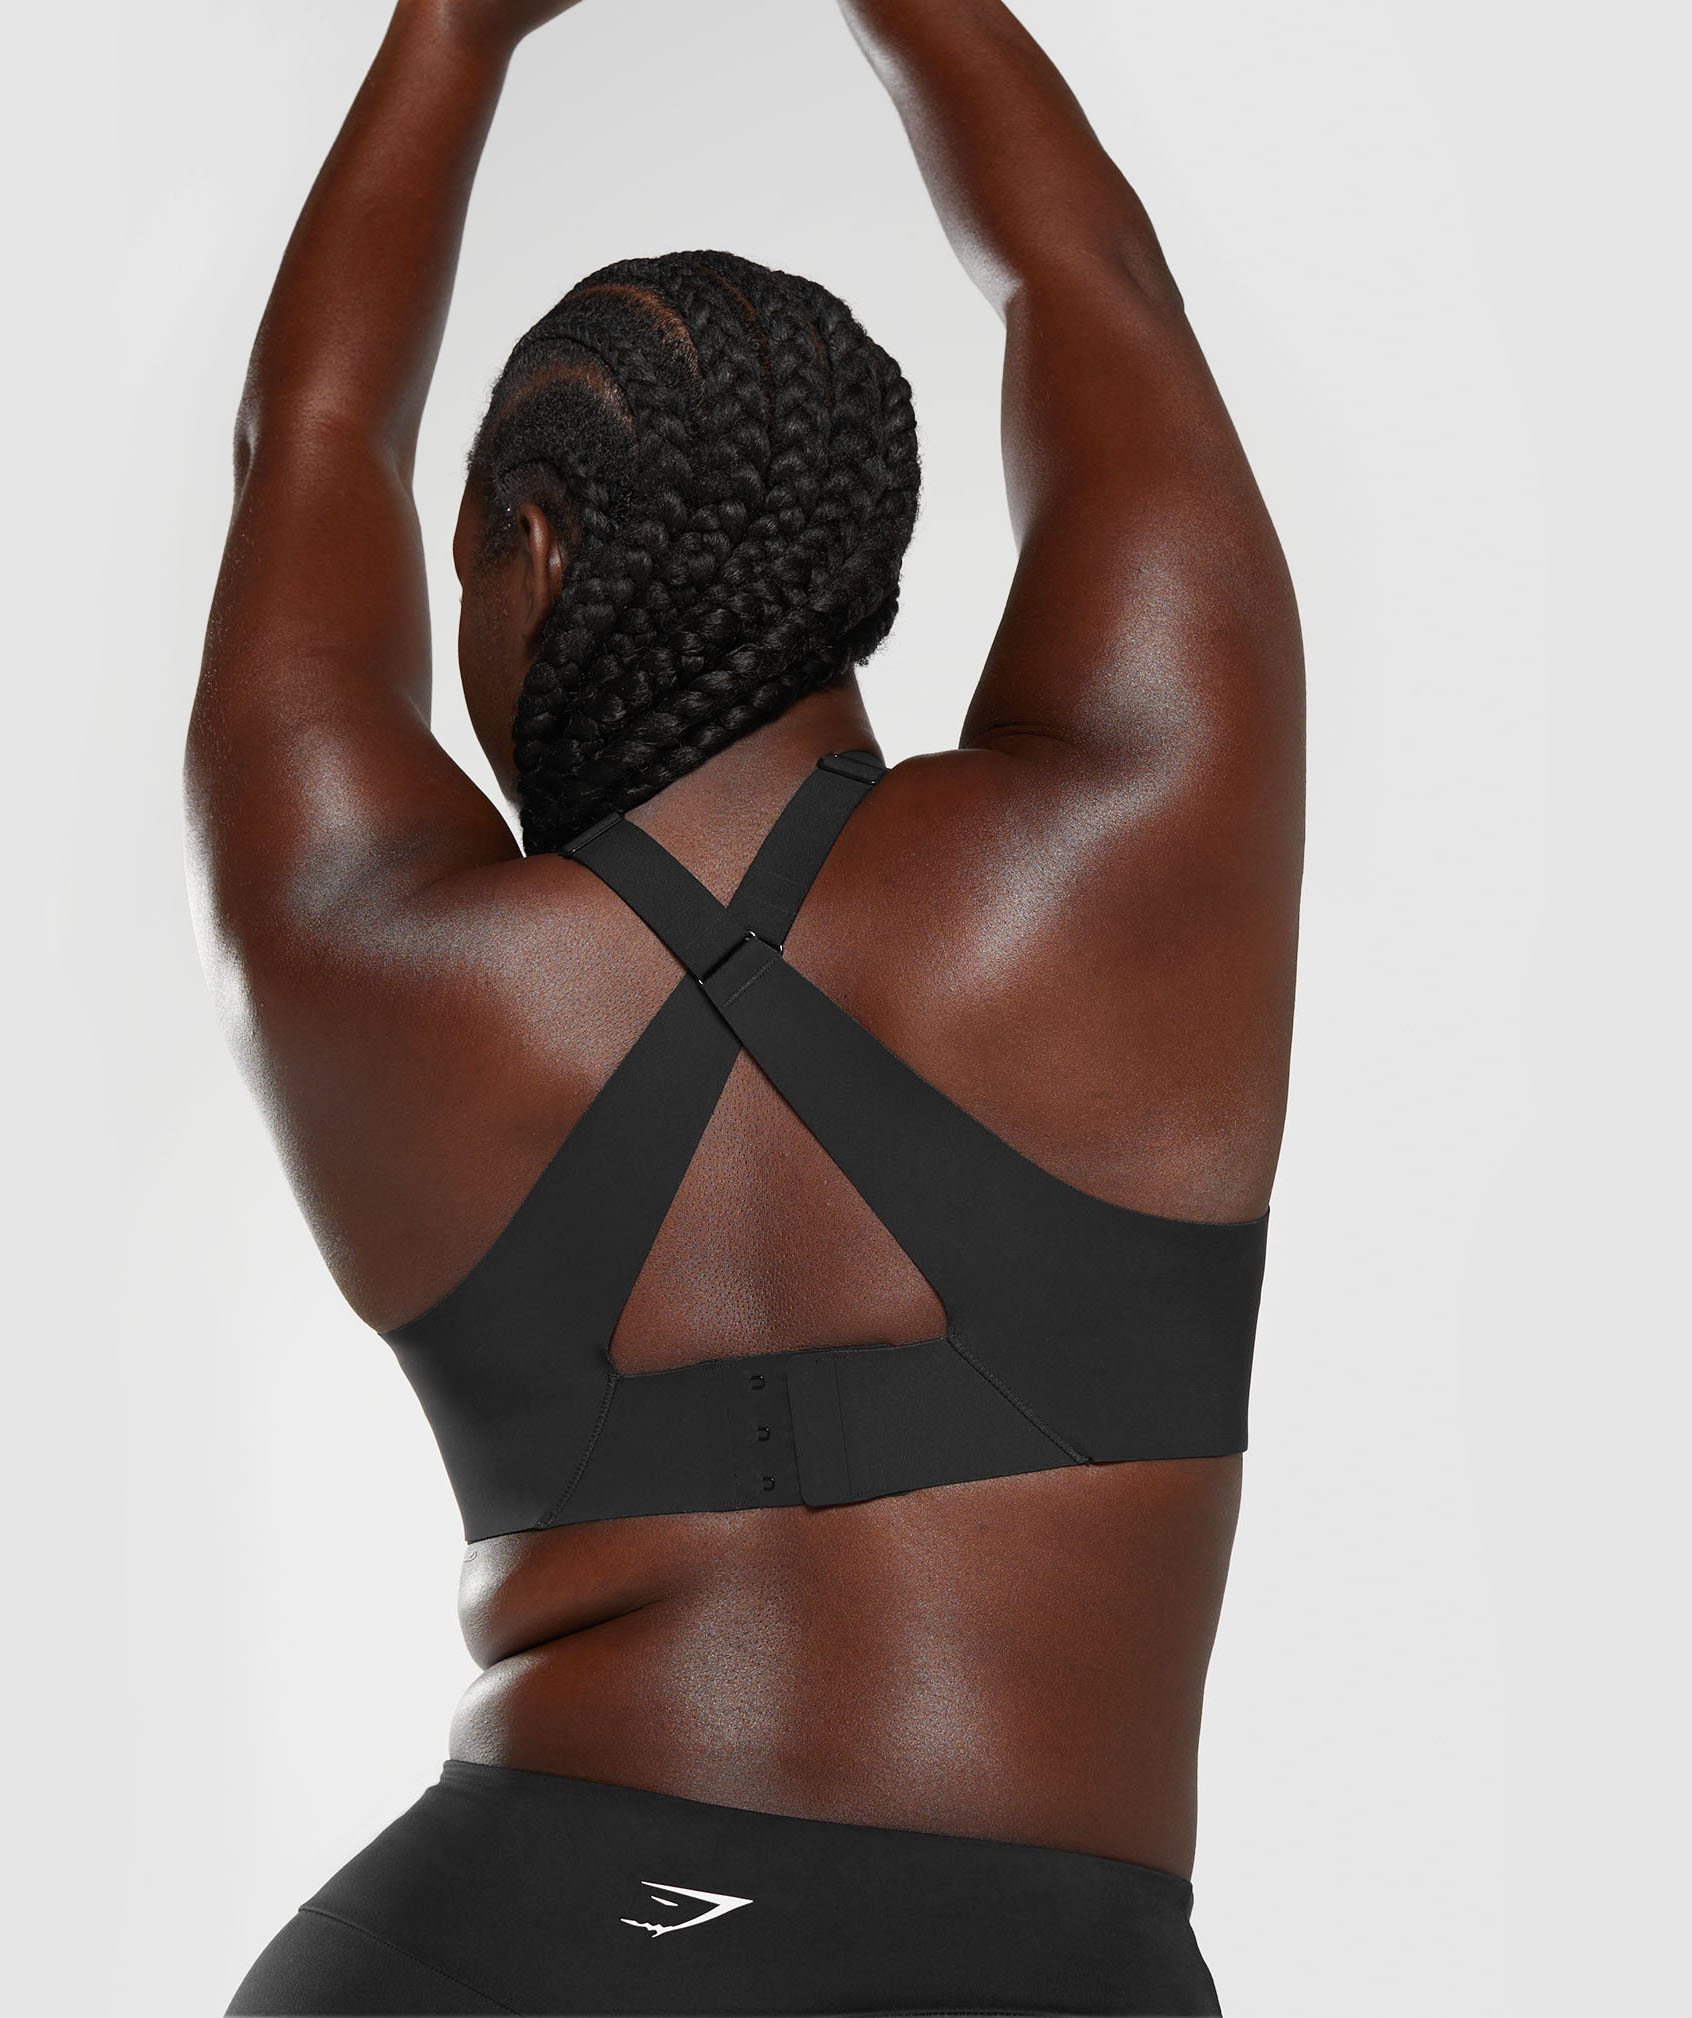 Finding the Right Sports Bra for Your Body Type and Activity Level